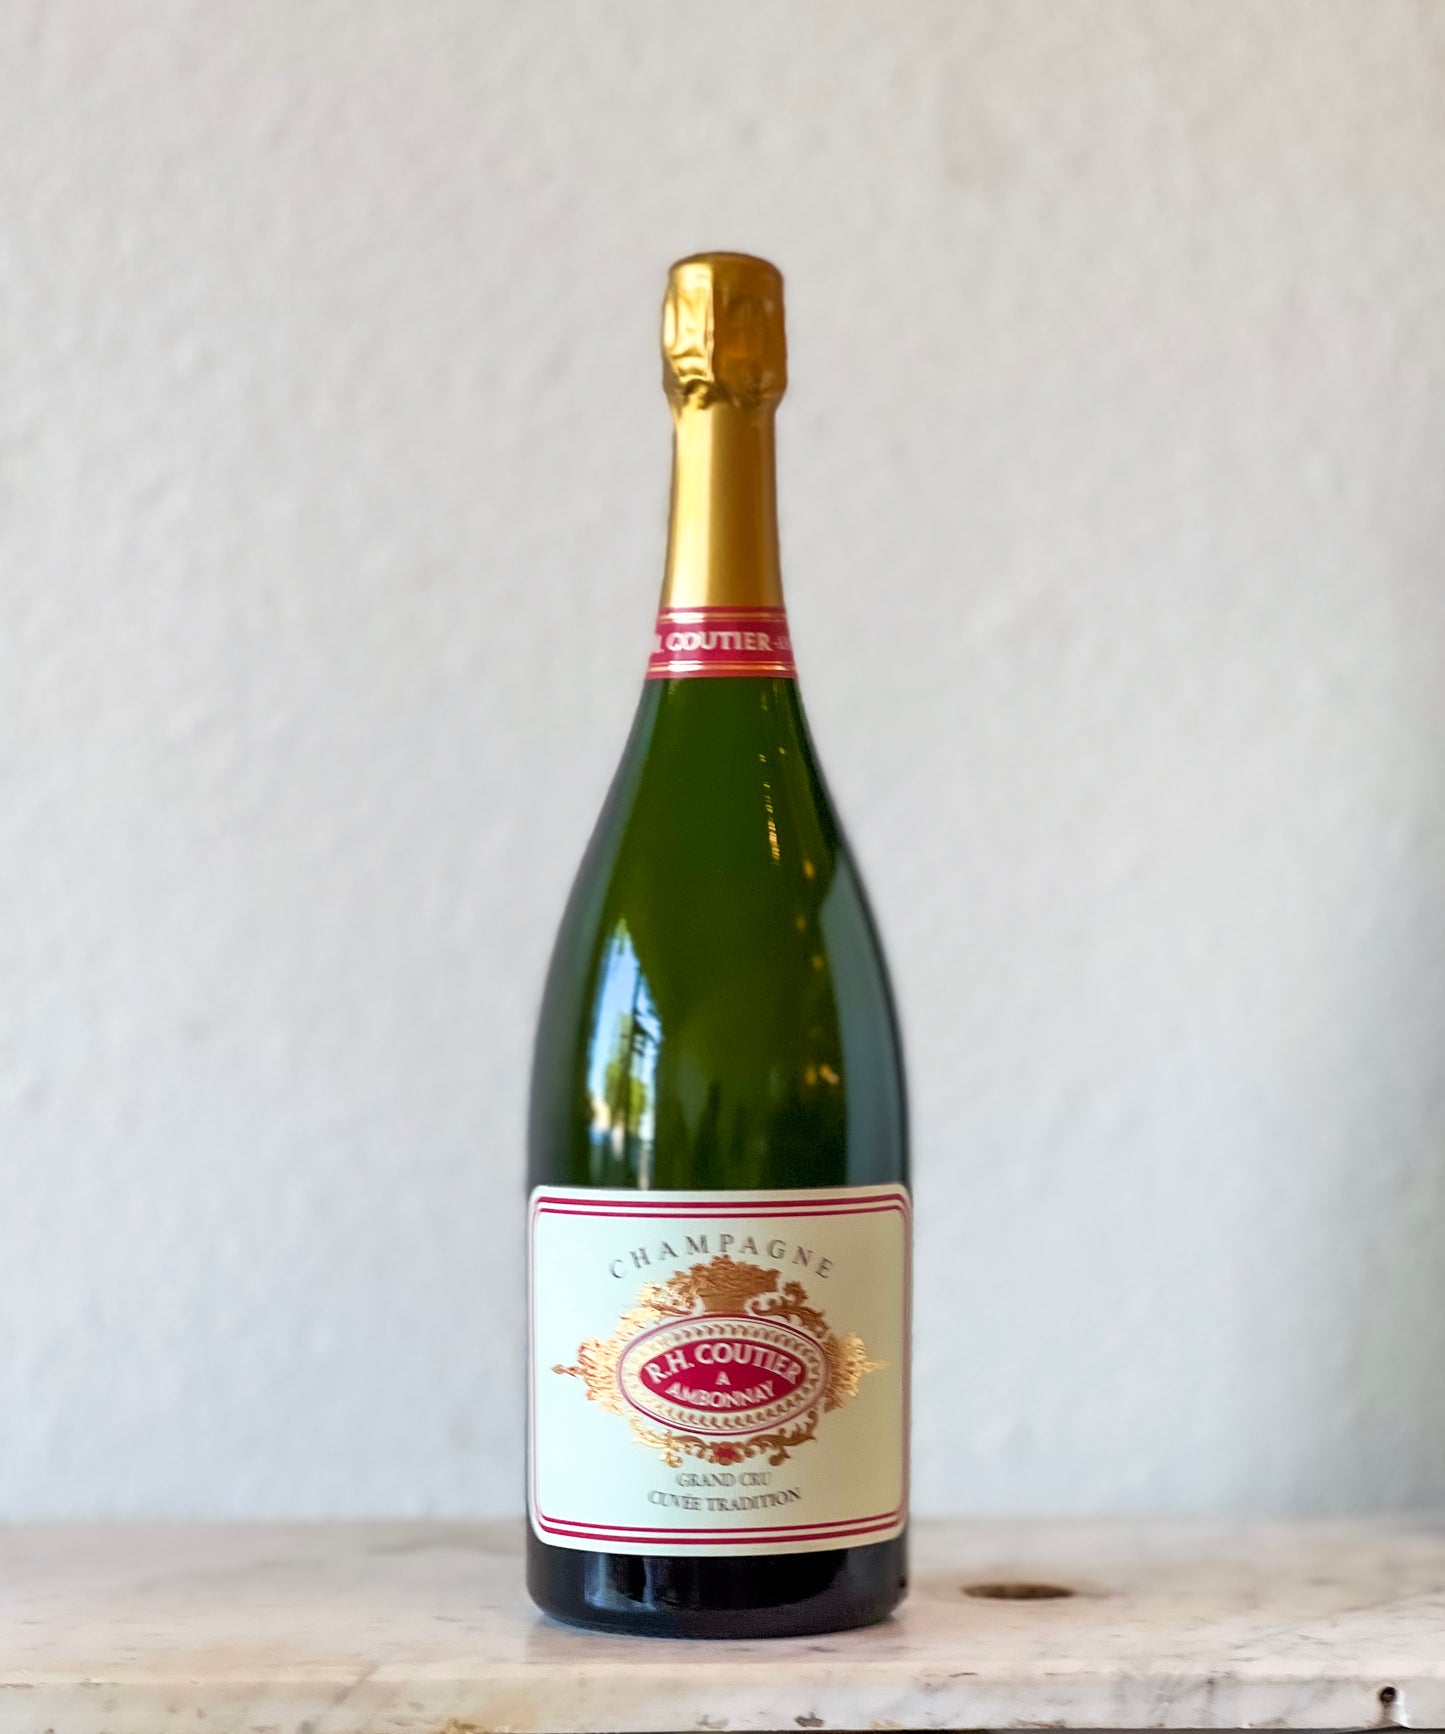 Coutier, 'Cuvee Tradition' Brut Champagne NV MAGNUM